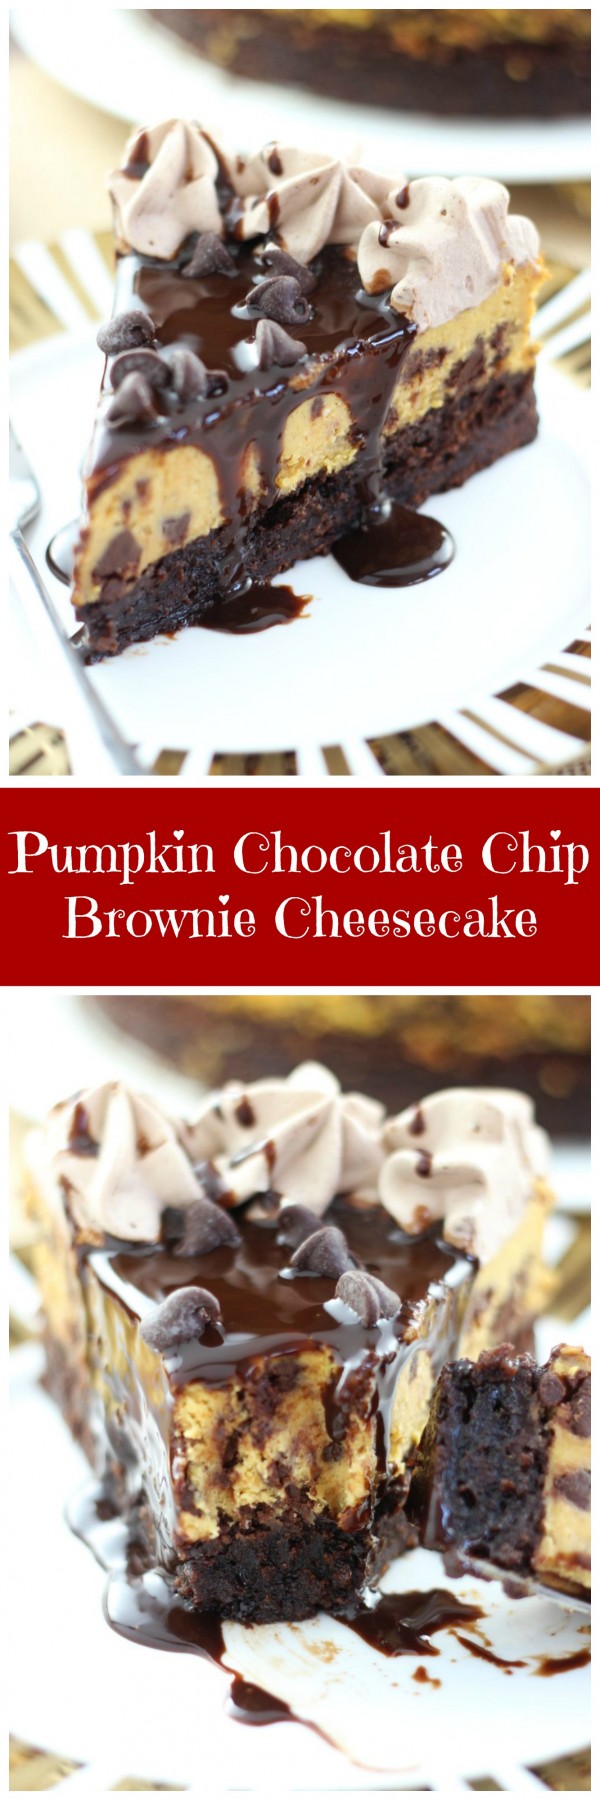 Pumpkin Chocolate Chip Brownie Cheesecake - The Gold Lining Girl